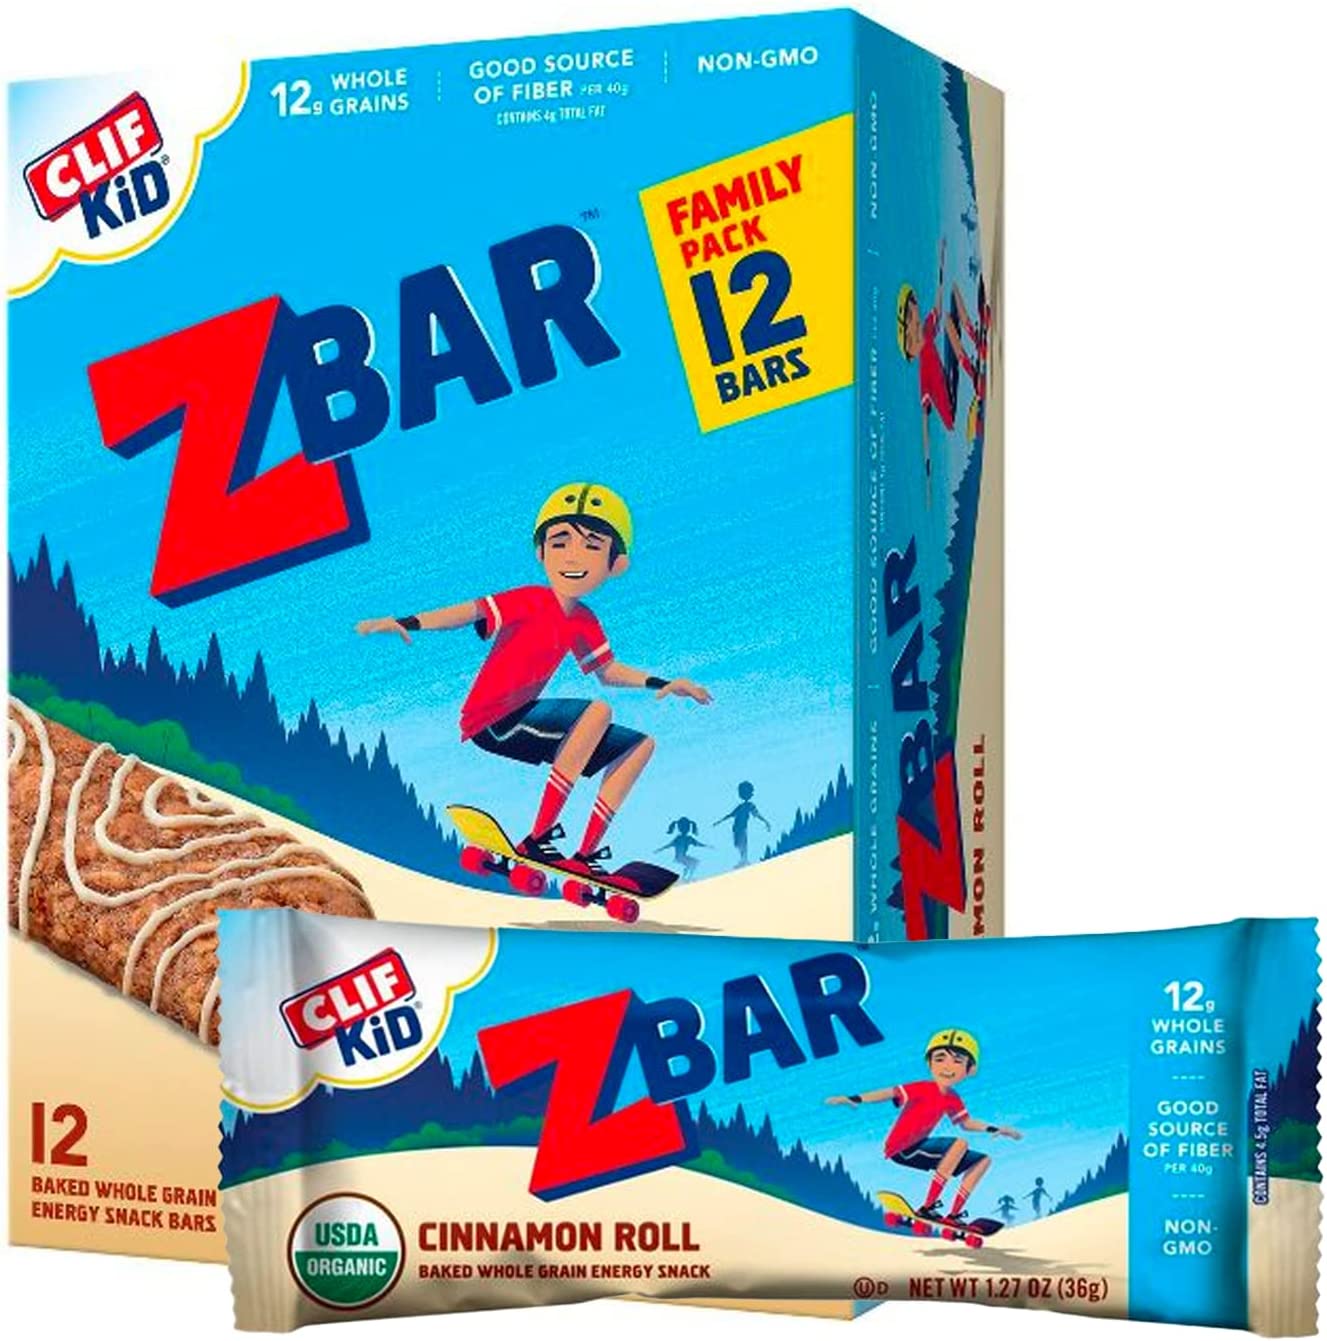 CLIF KID- Cinnamon Roll ZBar, Whole Grain Food Bar, Great Snack for Kids, Made with USDA Organic Ingredients, Good Source of Fiber, Chewy Texture, Fresh-Baked Flavor, Non-GMO (12 Pack)